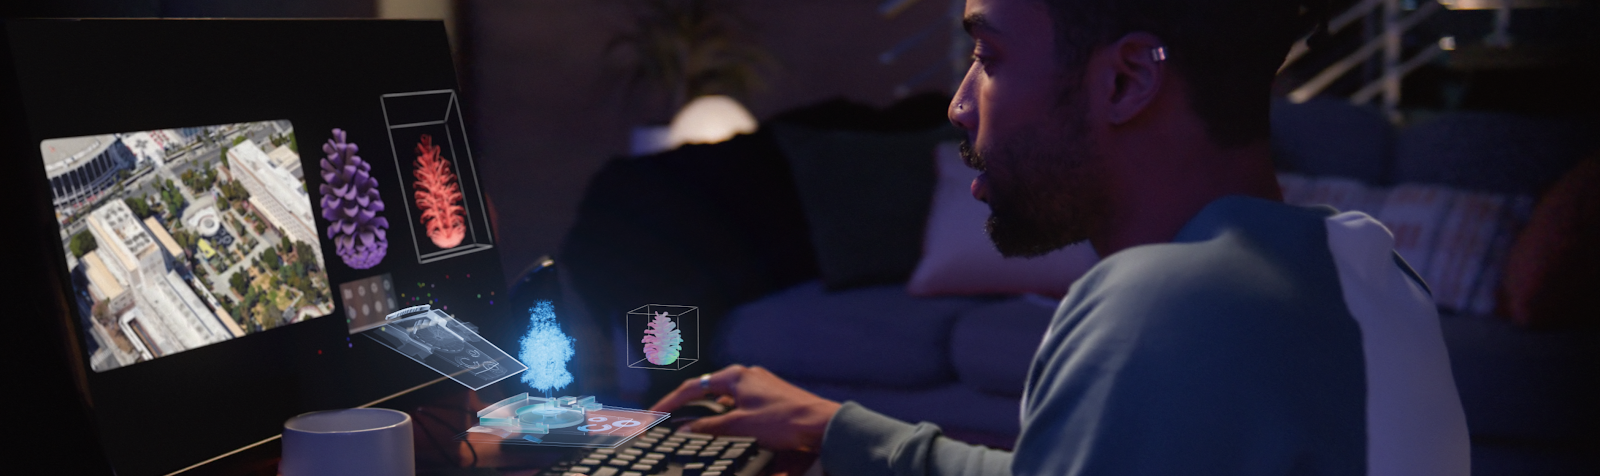 Google and Space Invaders launch an immersive AR game